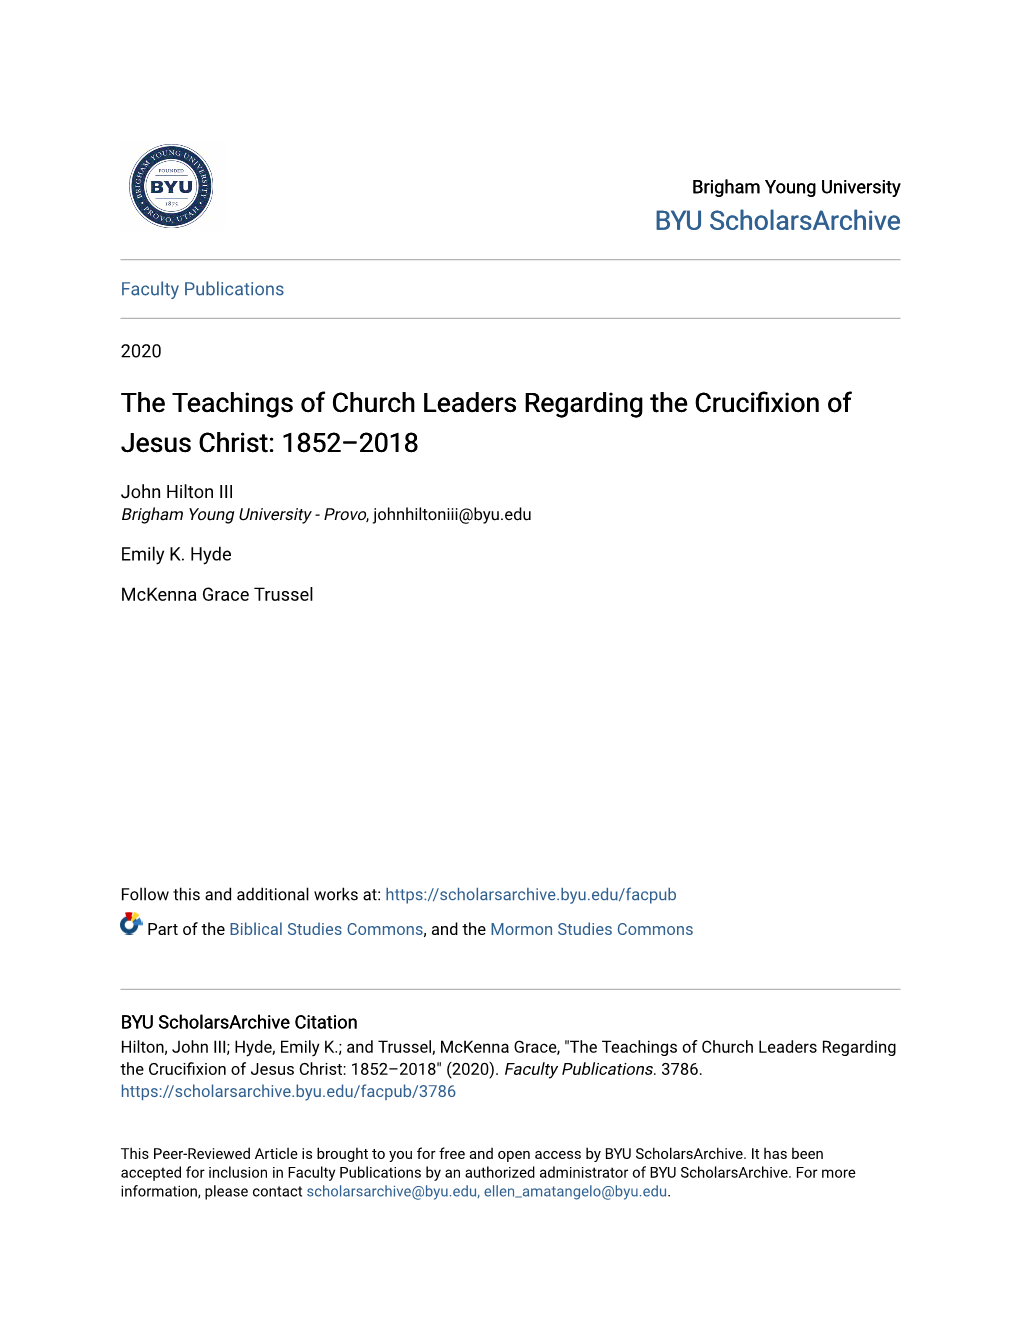 The Teachings of Church Leaders Regarding the Crucifixion of Jesus Christ: 1852–2018